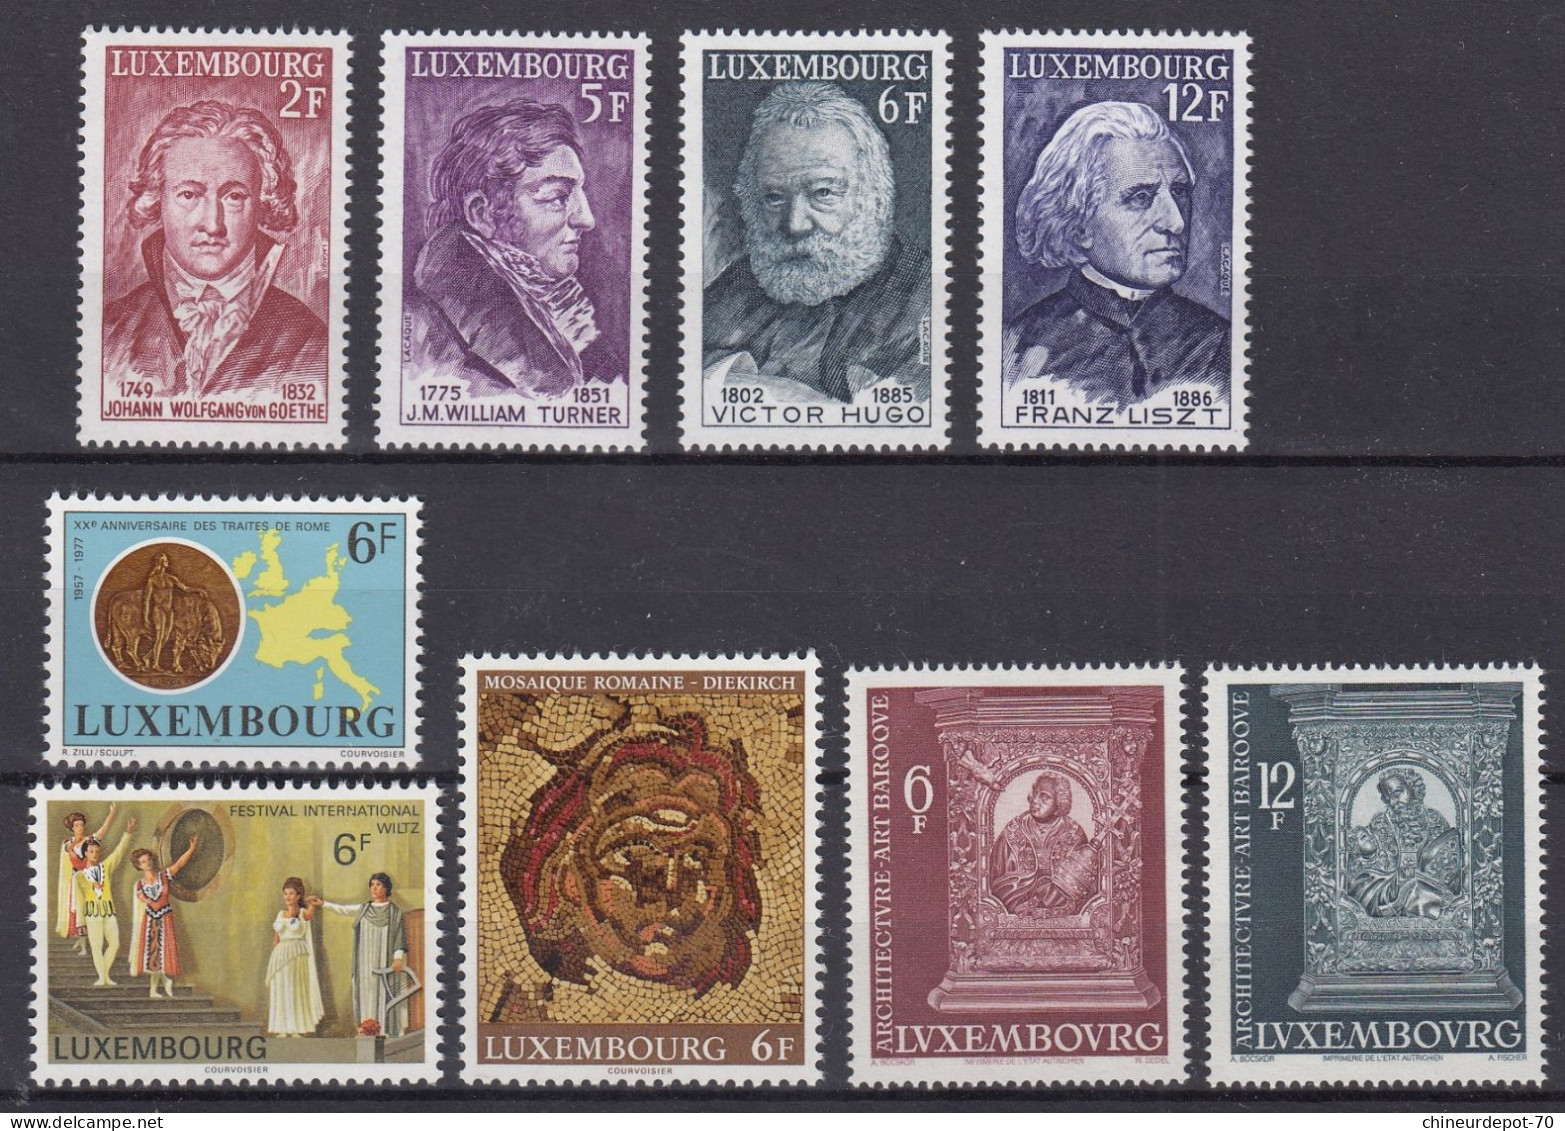 Luxembourg NEUFS SANS CHARNIERE ** 1977 - Nuevos